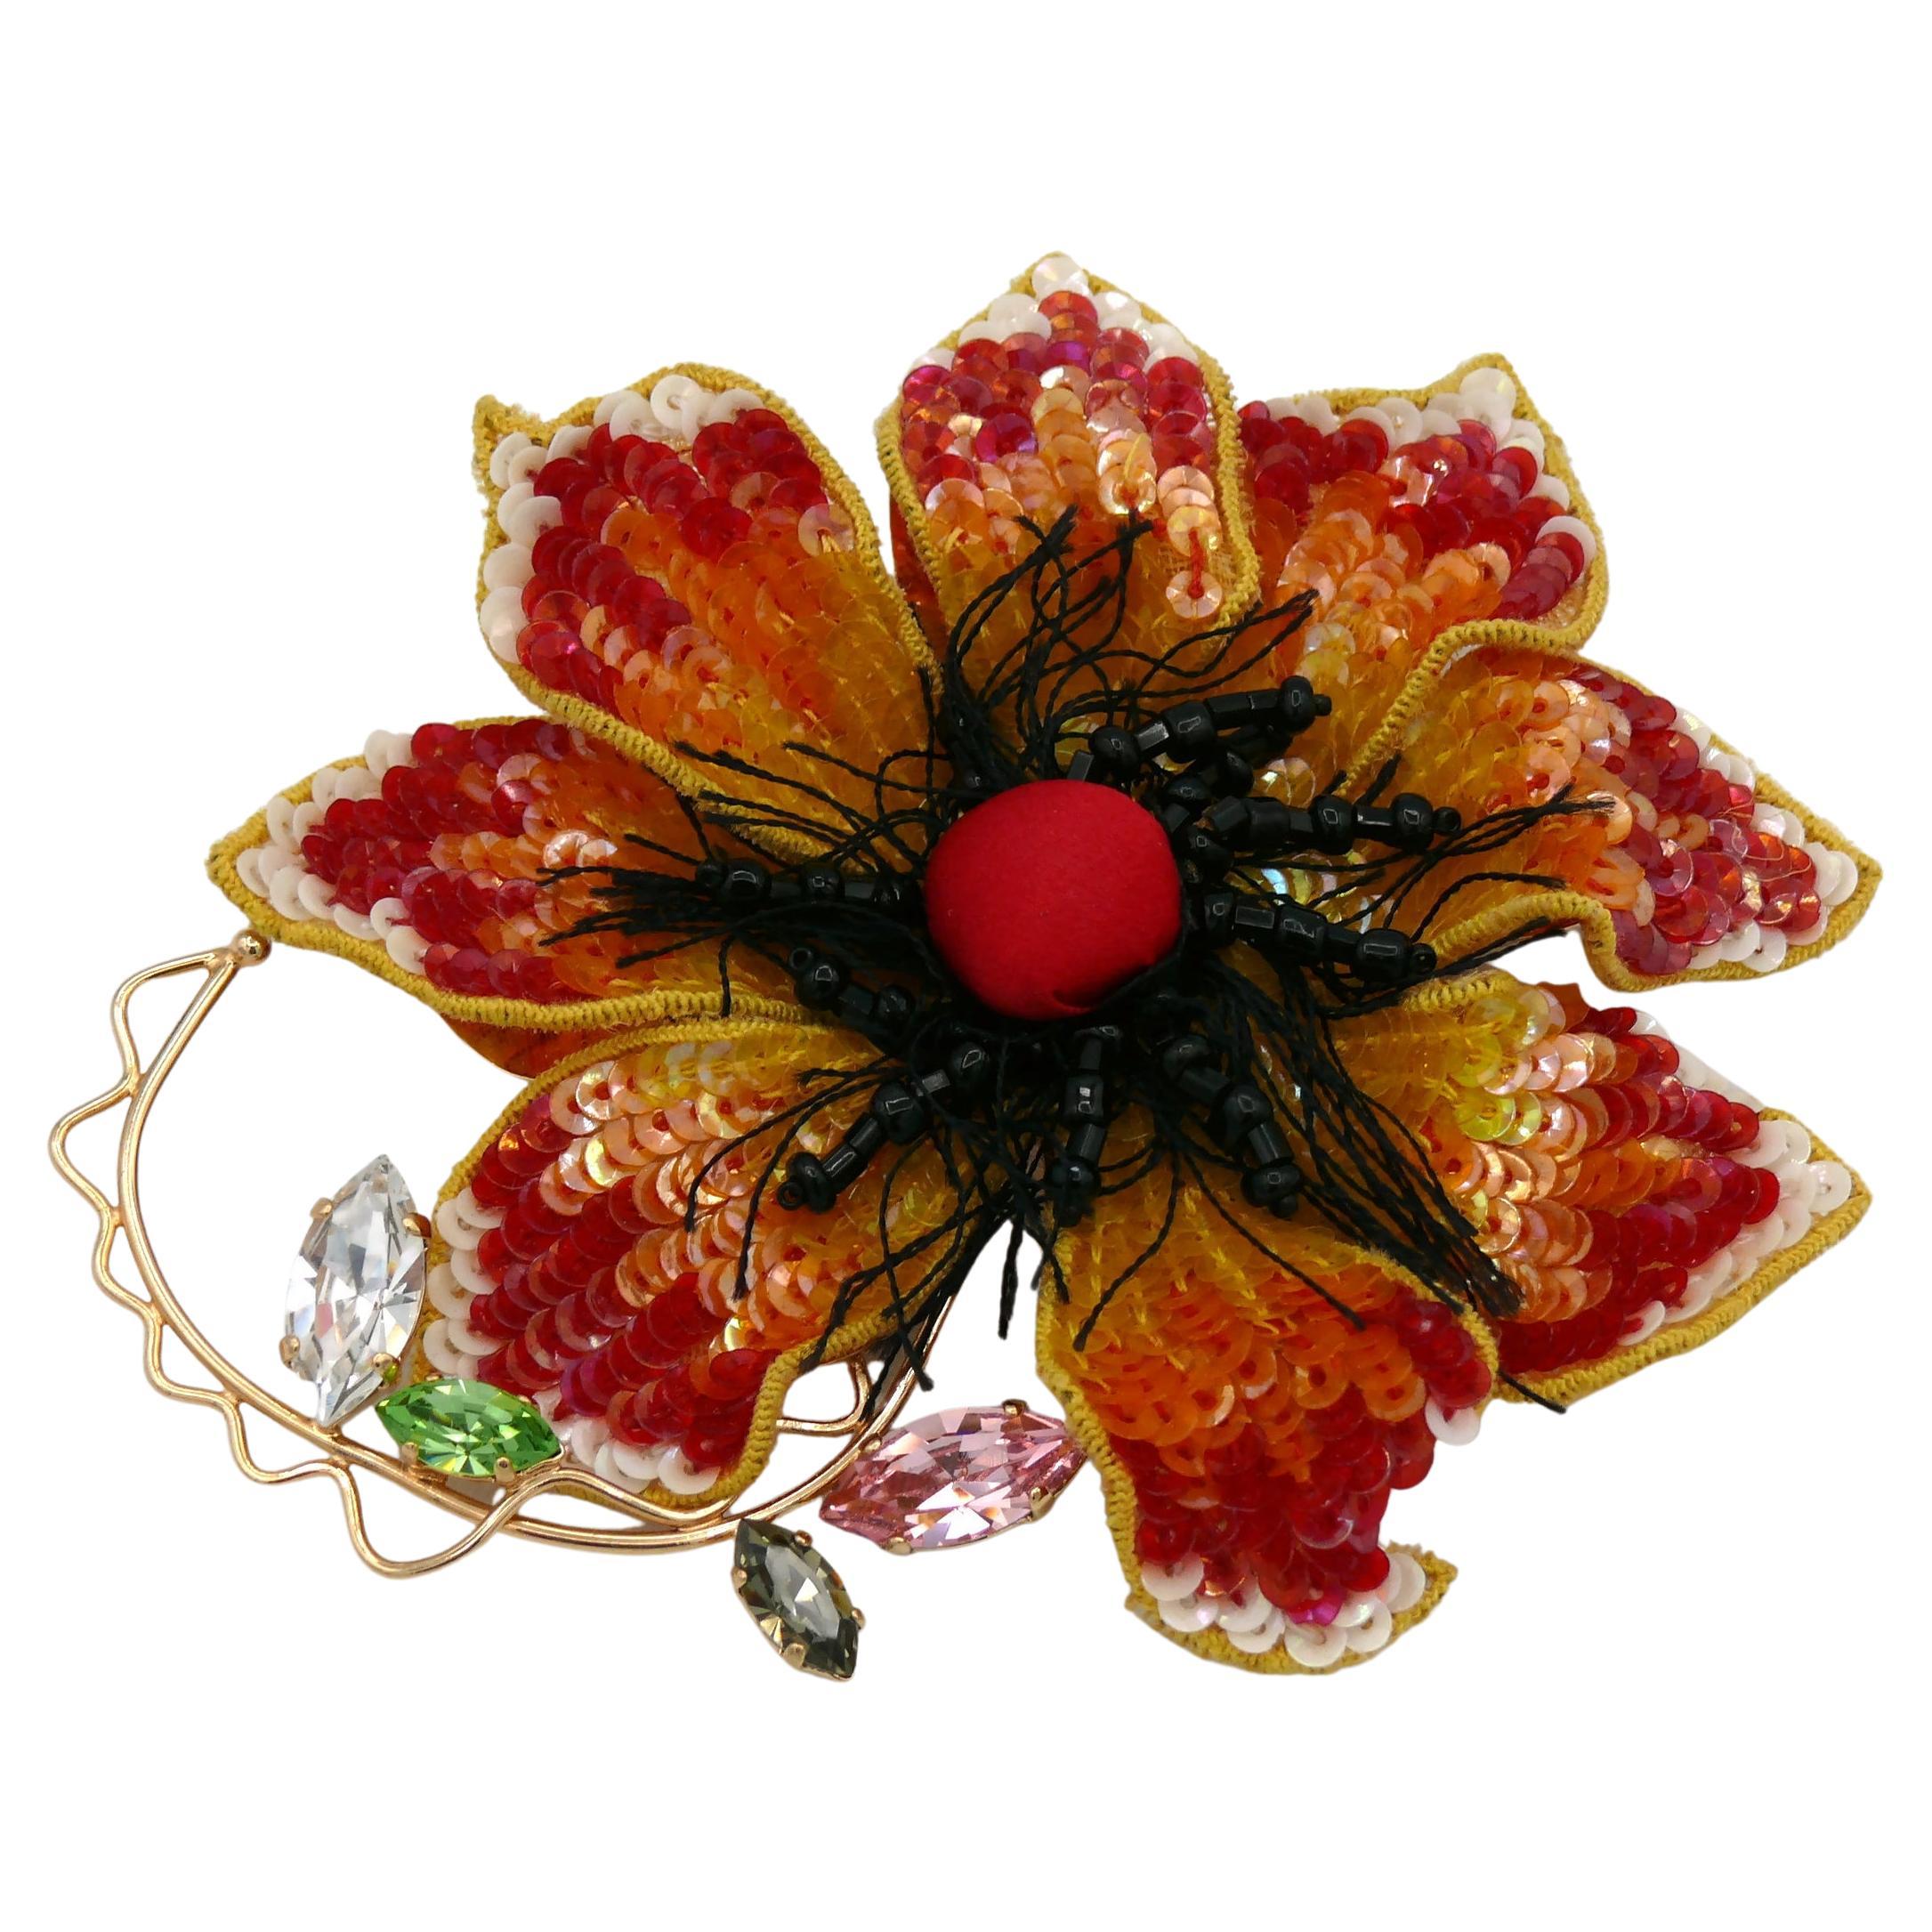 CHRISTIAN LACROIX Vintage Embroidered Flower Brooch For Sale